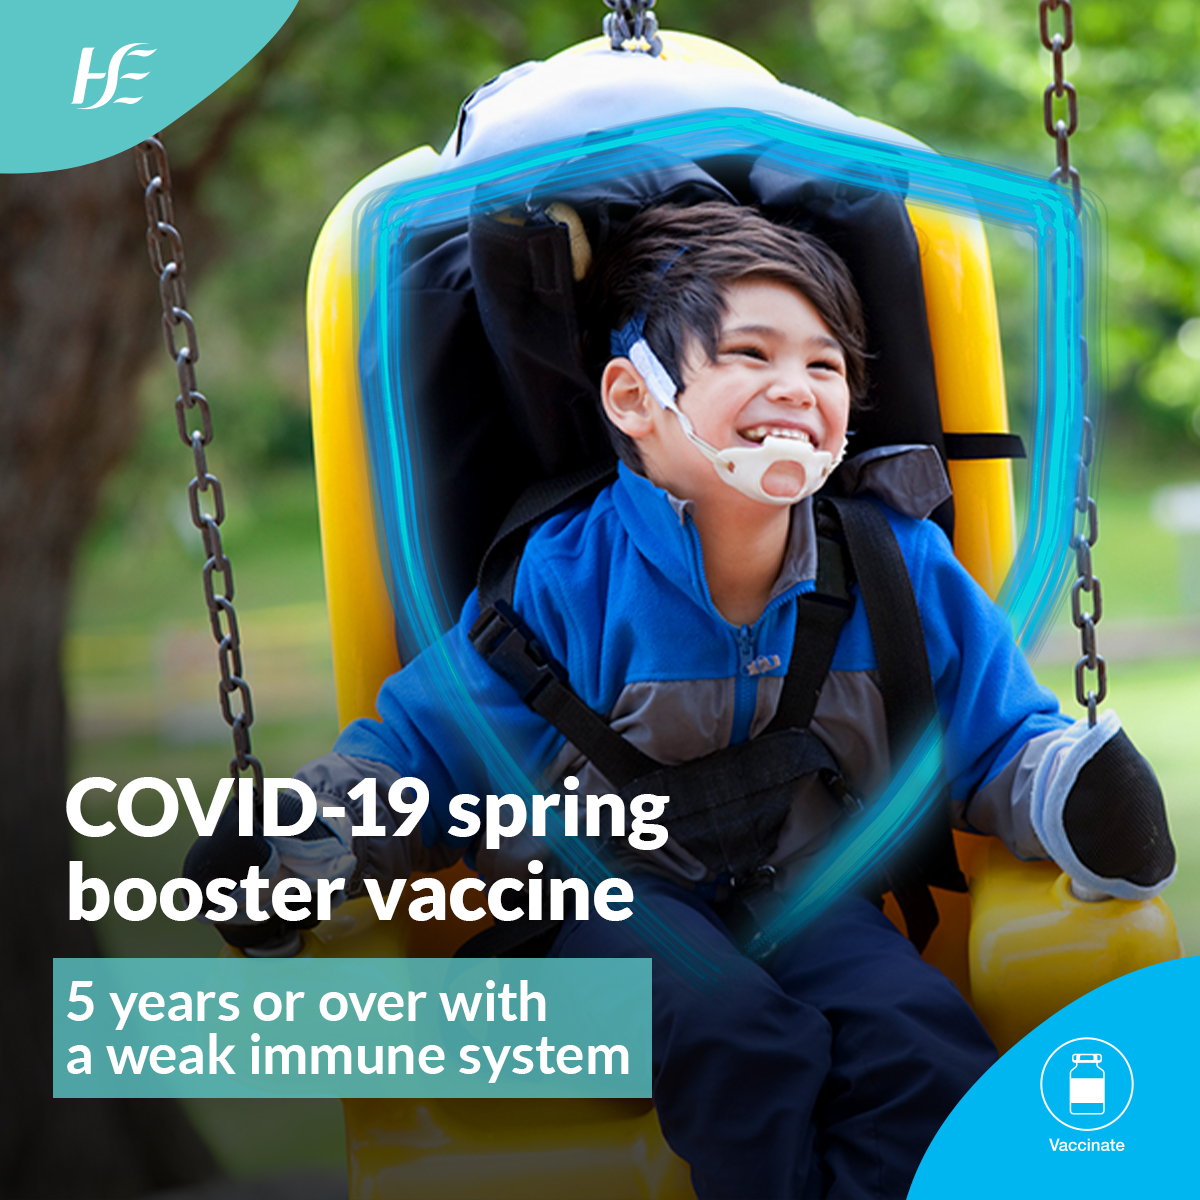 Getting vaccinated is the best way we can protect ourselves from COVID-19. If you have a weak immune system, it's time for your recommended spring booster vaccine. For more information, visit: bit.ly/3Ki4Sx1 #COVIDVaccine